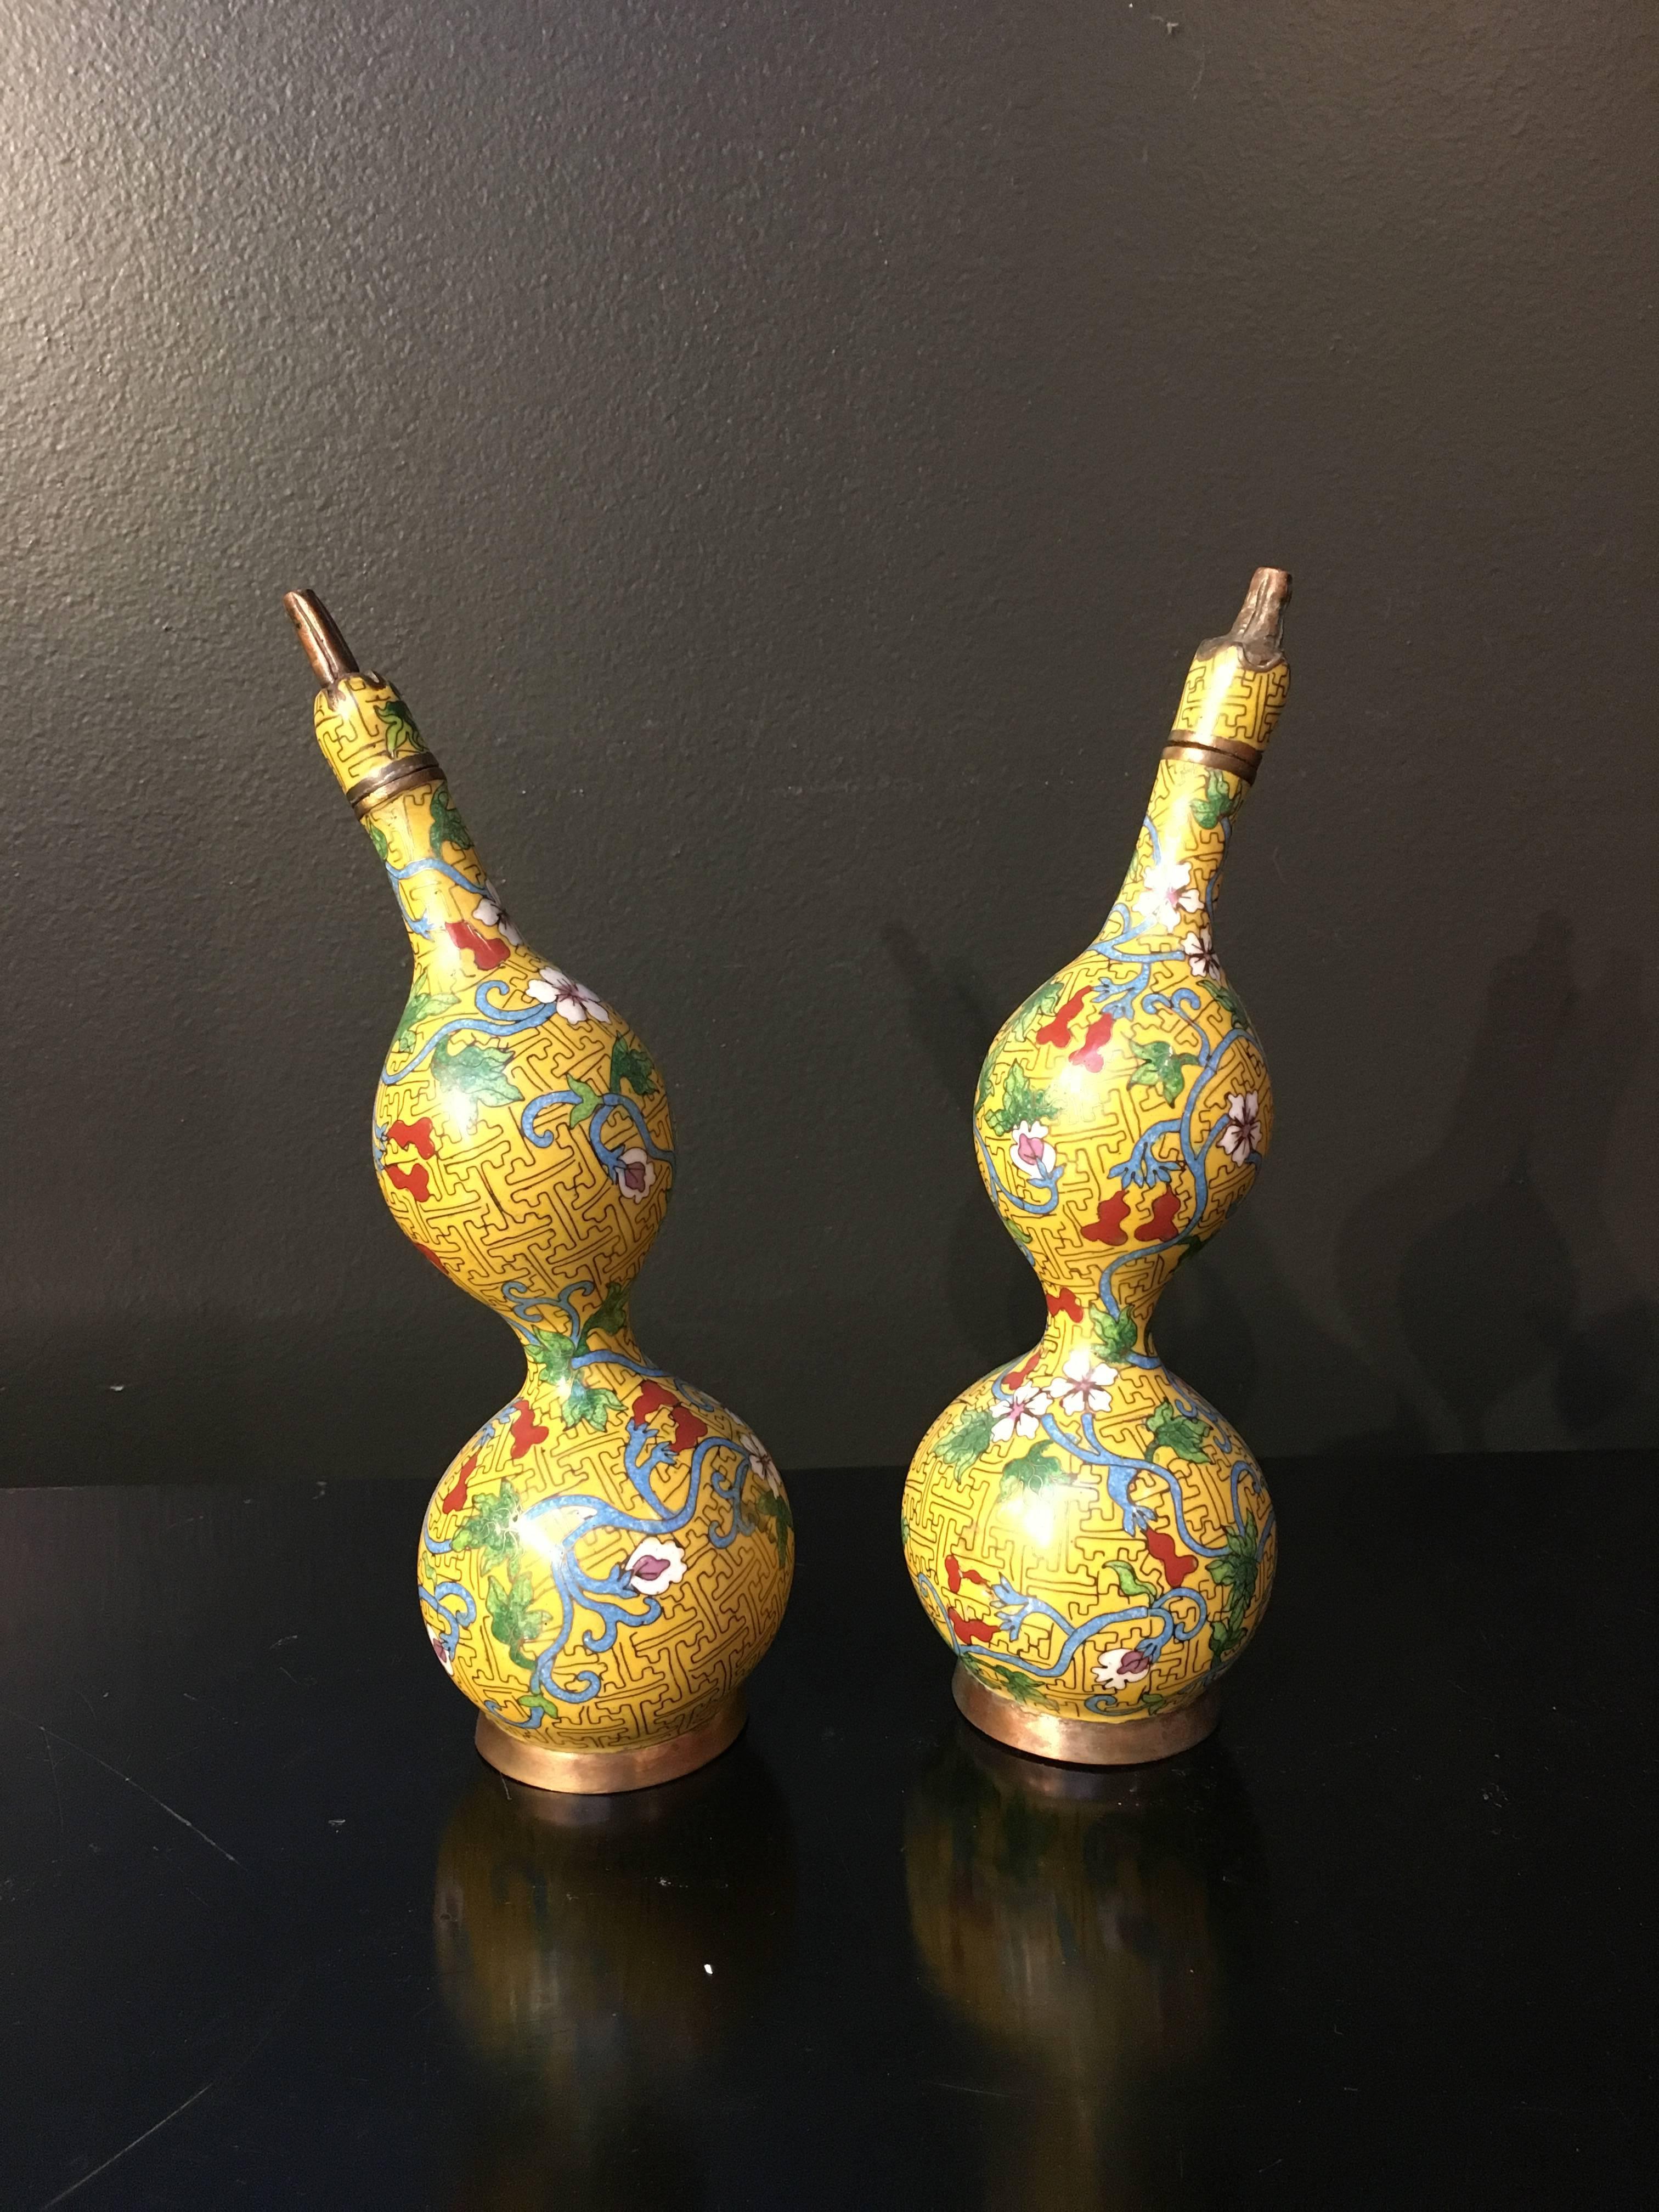 Enameled Pair of Chinese Yellow Cloisonne Double Gourd Bottles, Early 20th Century